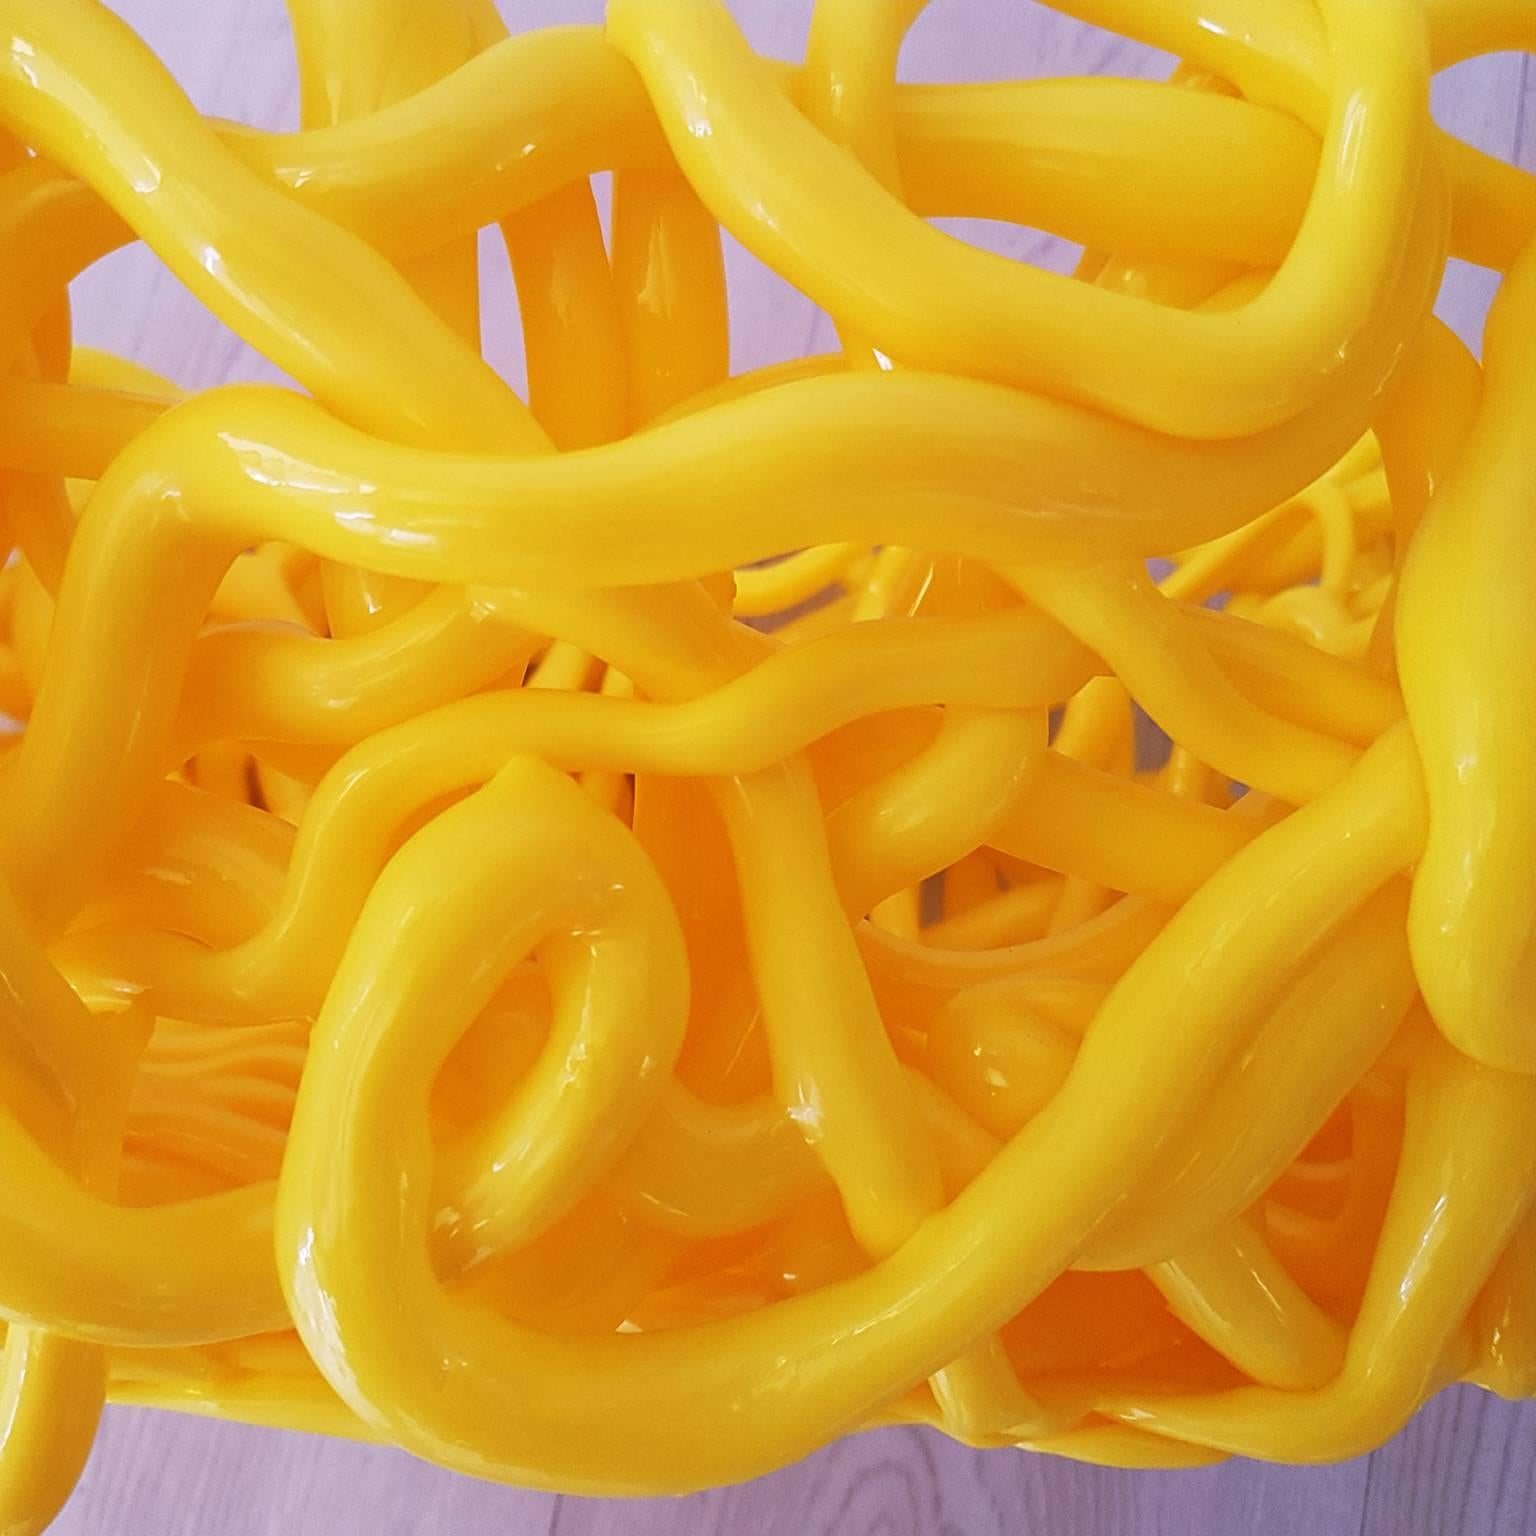 Other Contemporary Yellow Basket by Gaetano Pesce in Poliurethane, 21th Century